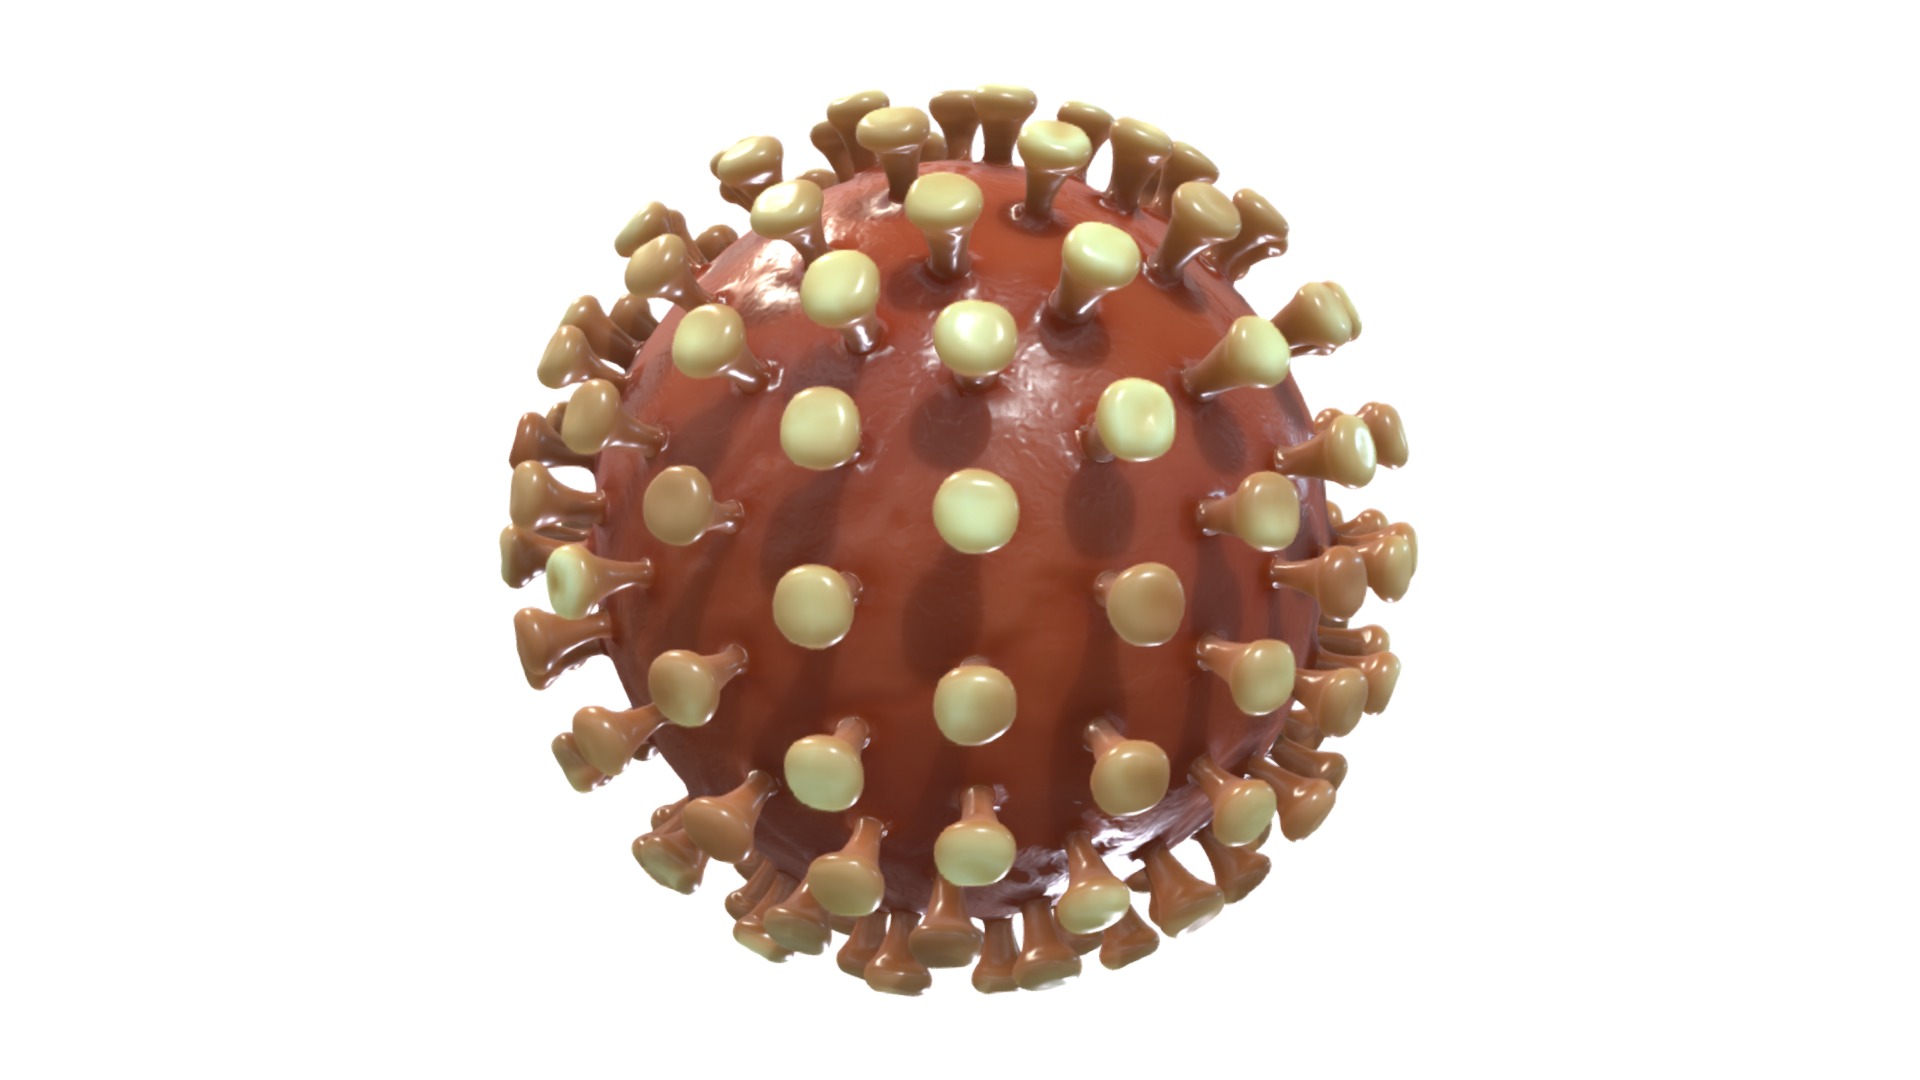 3D model Coronavirus nCoV Covid-19 - This is a 3D model of the Coronavirus nCoV Covid-19. The 3D model is about a pile of candy.